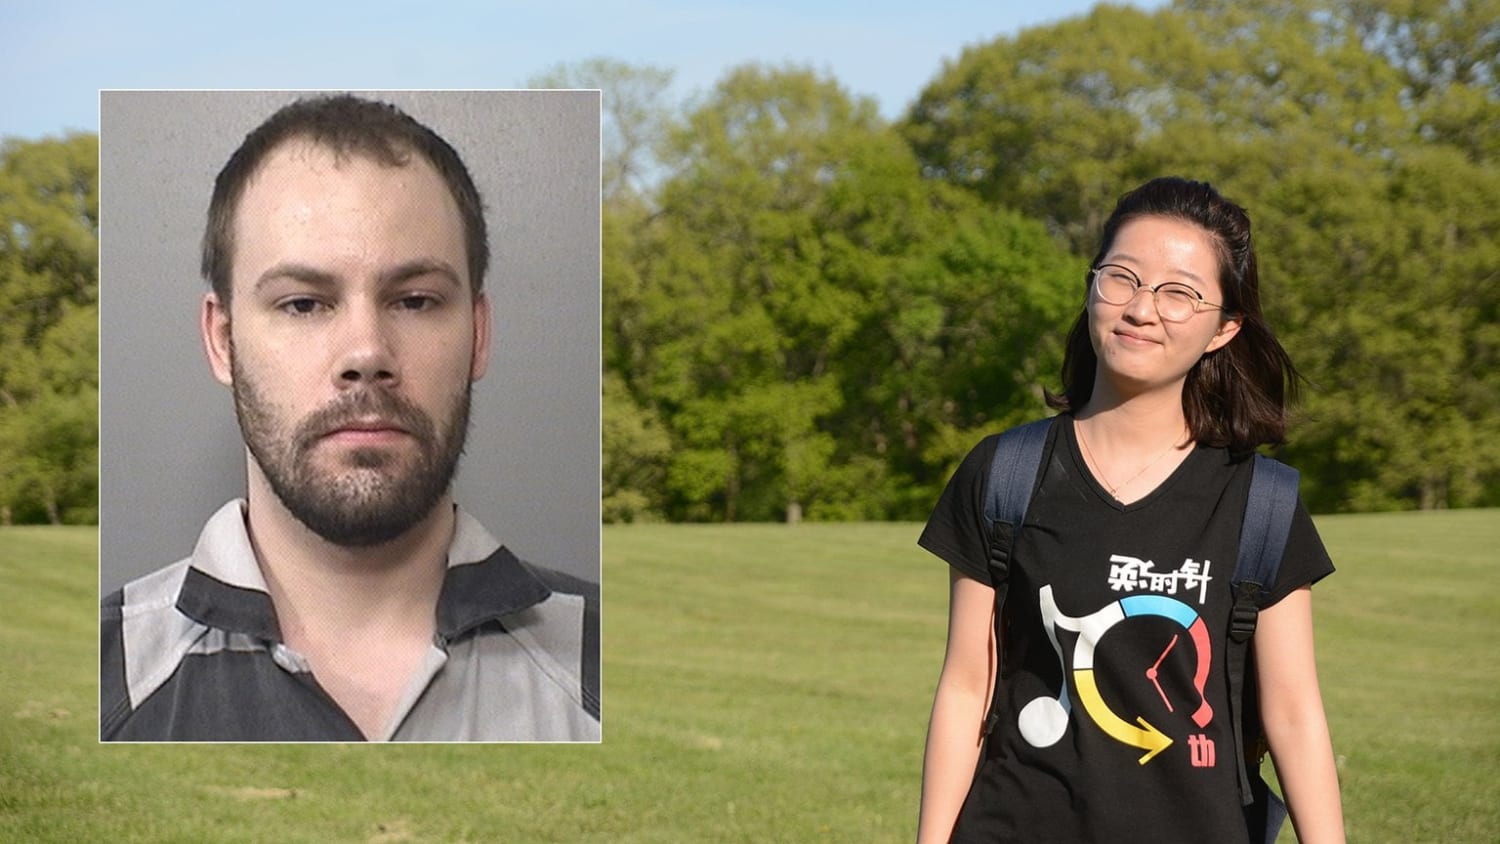 On June 9, 2017, a kidnapping and murder took place on my college campus, the University of Illinois at Urbana Champaign. The victim of these brutal crimes was Yingying Zhang, a 26 year old Chinese student conducting research at the university. This one hit too close to home and absolutely broke me